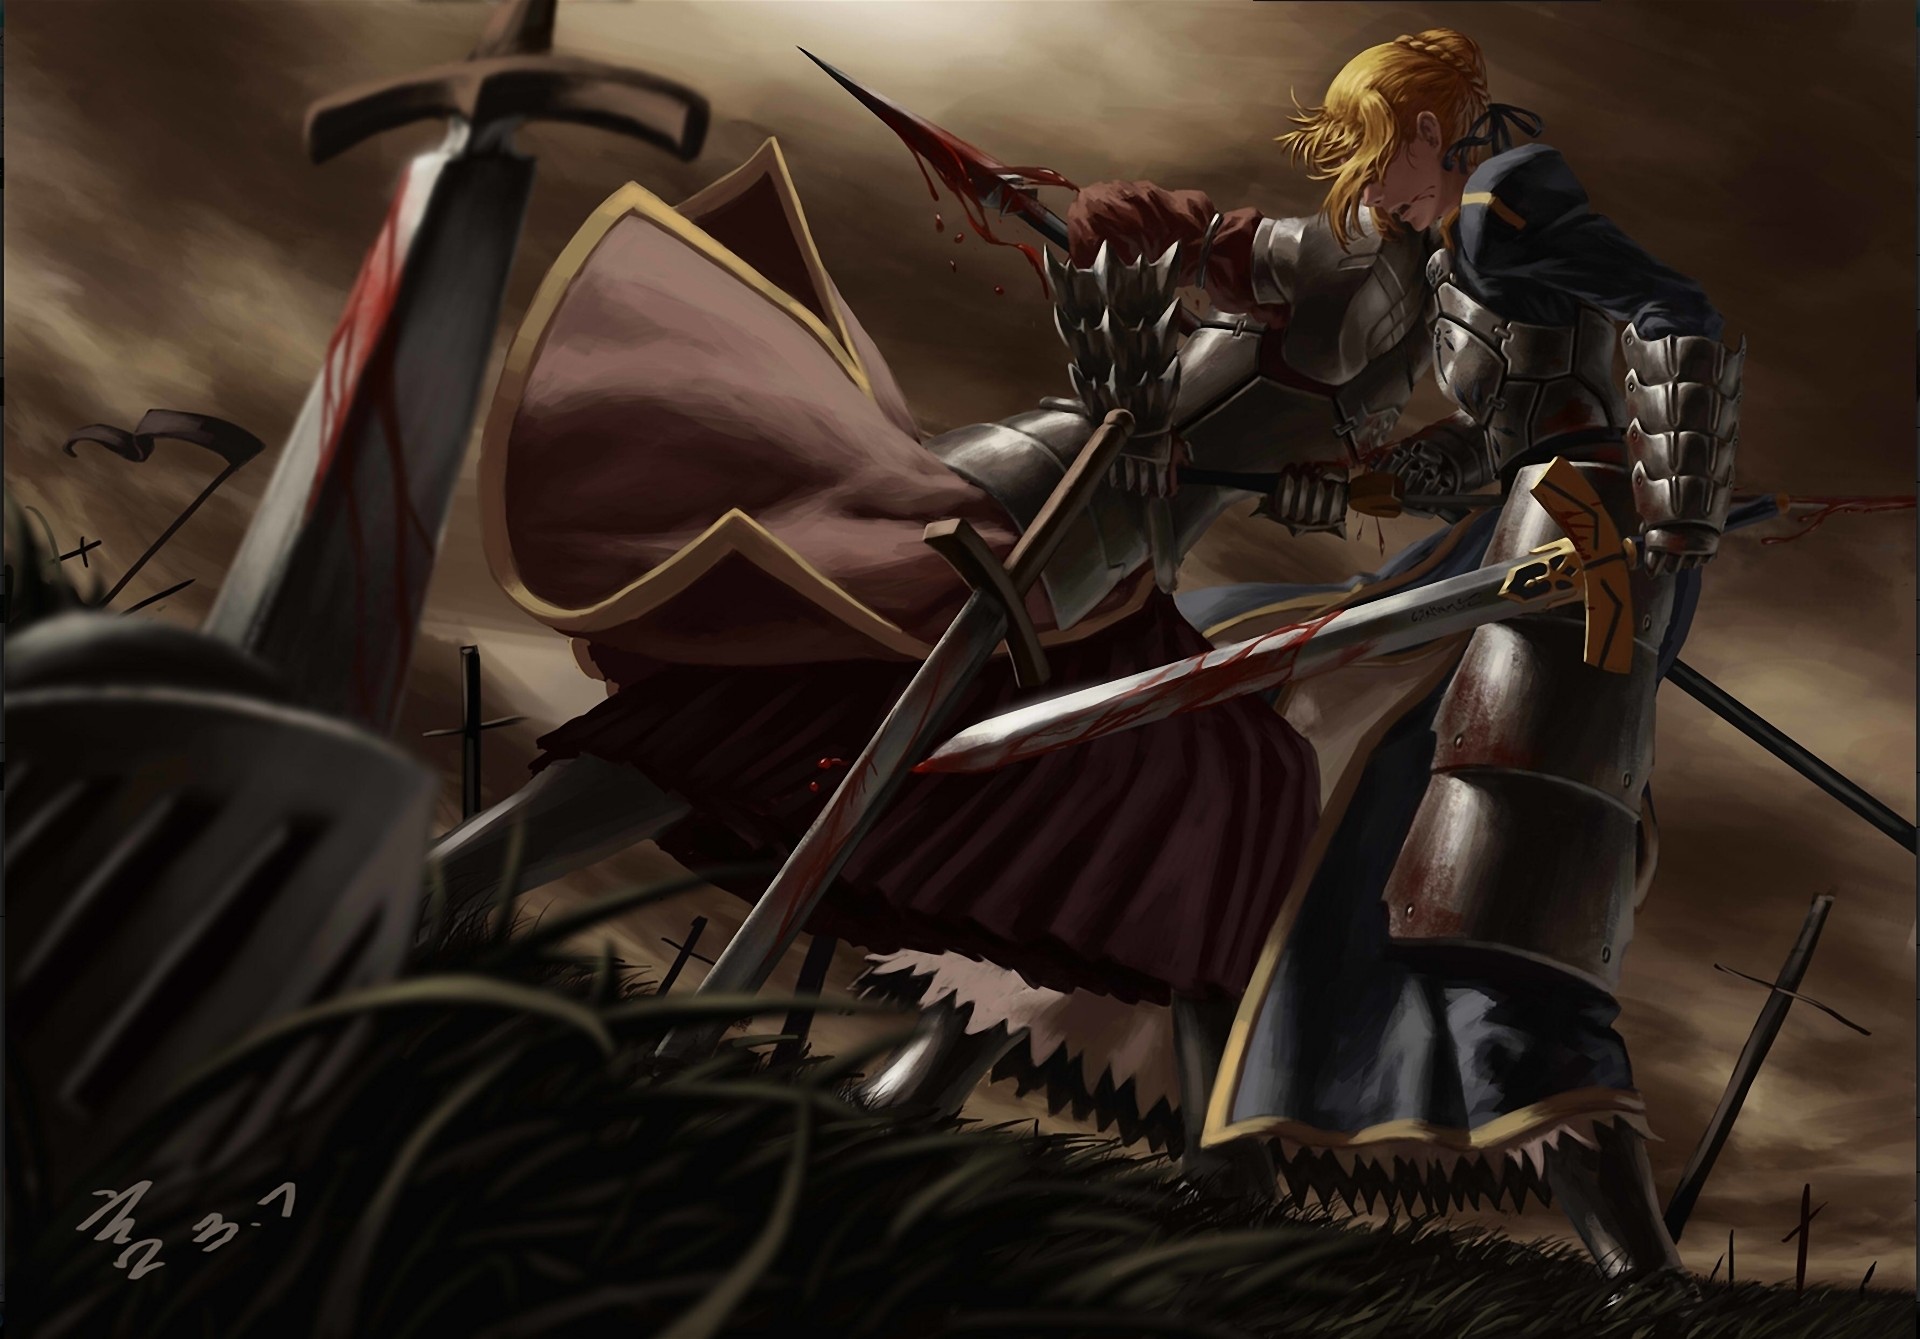 1920x1339 Anime - Fate/Zero Fate/Stay Night Saber (Fate Series) Weapon Sword